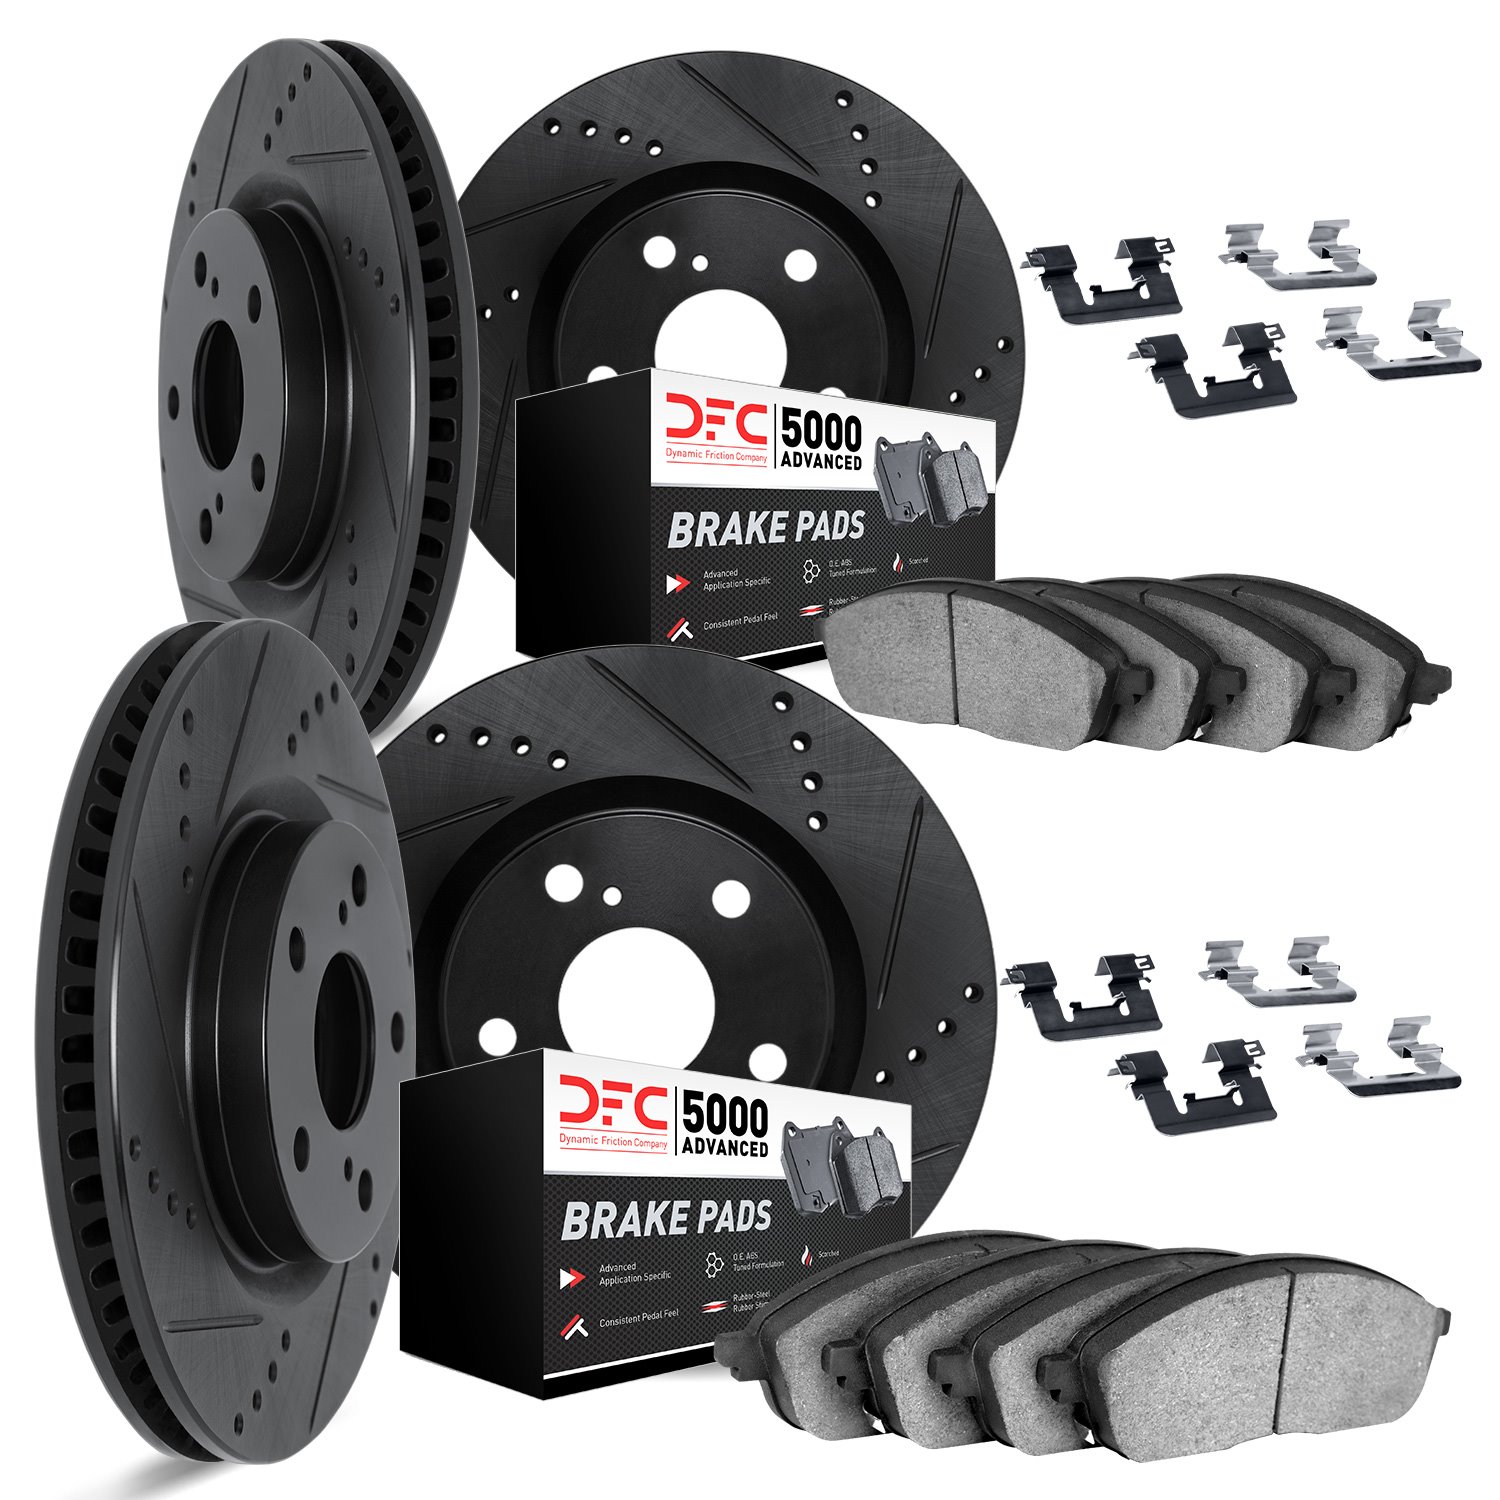 8514-31004 Drilled/Slotted Brake Rotors w/5000 Advanced Brake Pads Kit & Hardware [Black], 2001-2005 BMW, Position: Front and Re